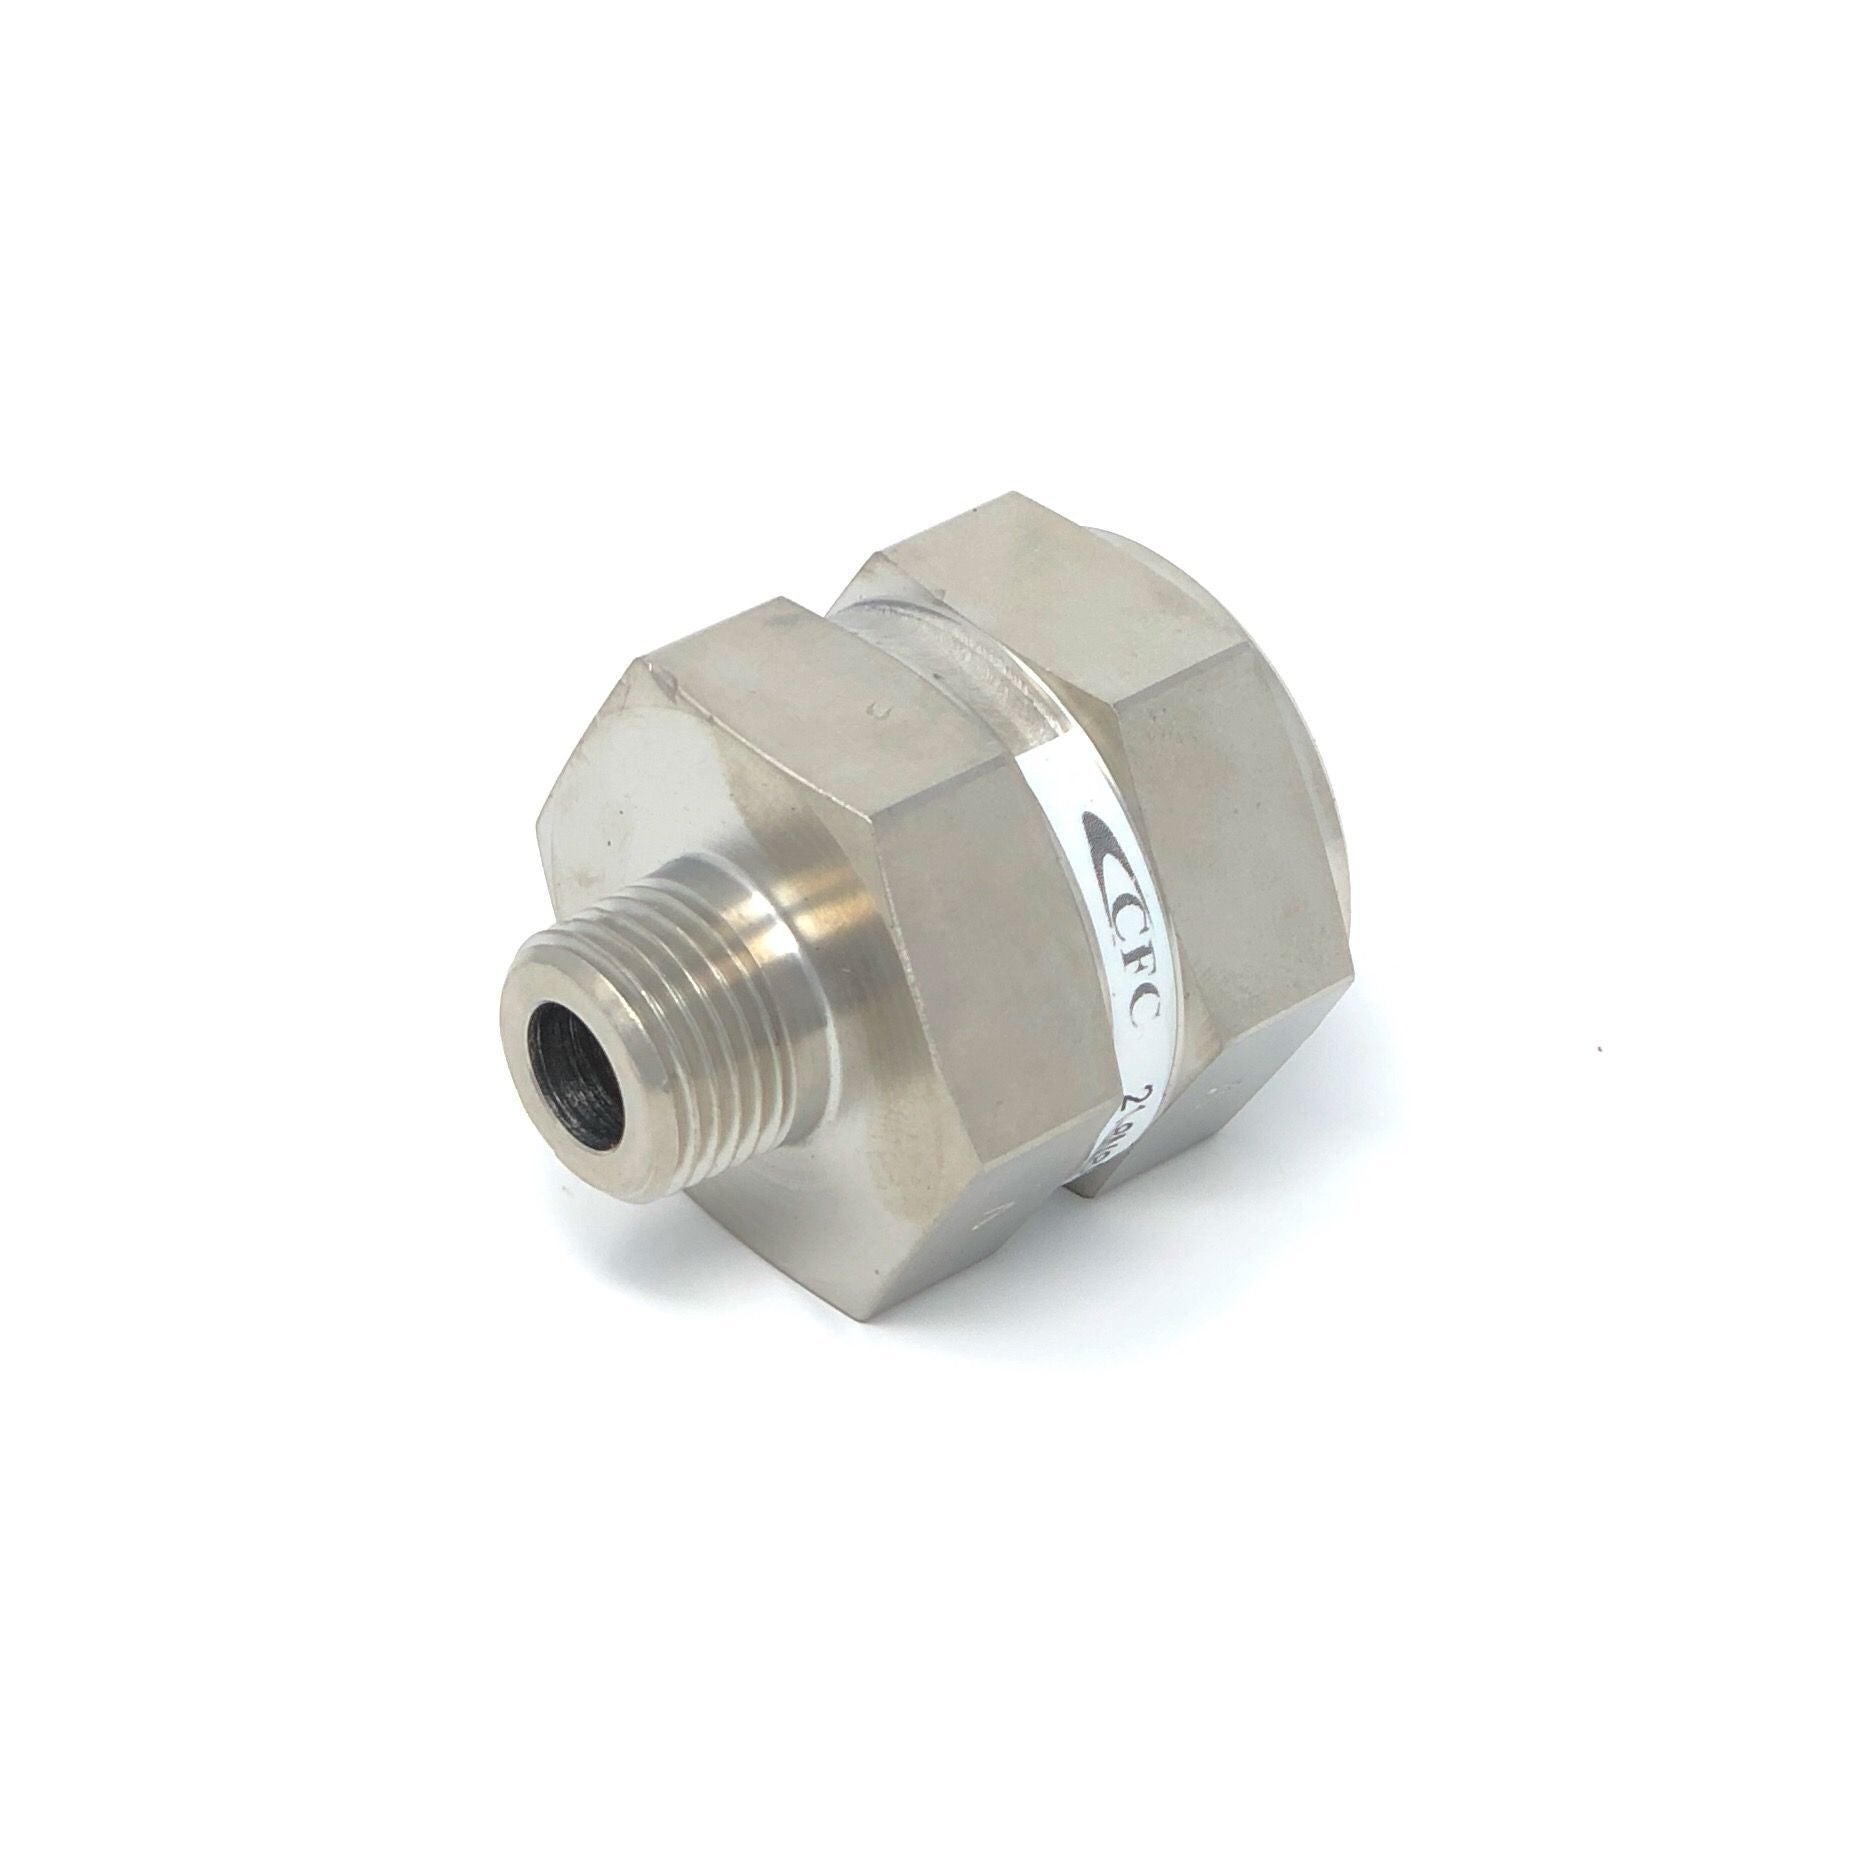 21-4T4T-10S : Chase High Pressure Inline Filter, 6000psi, 1/4" 37 Degree Flare, 10 Micron, No Visual Indicator, No Bypass